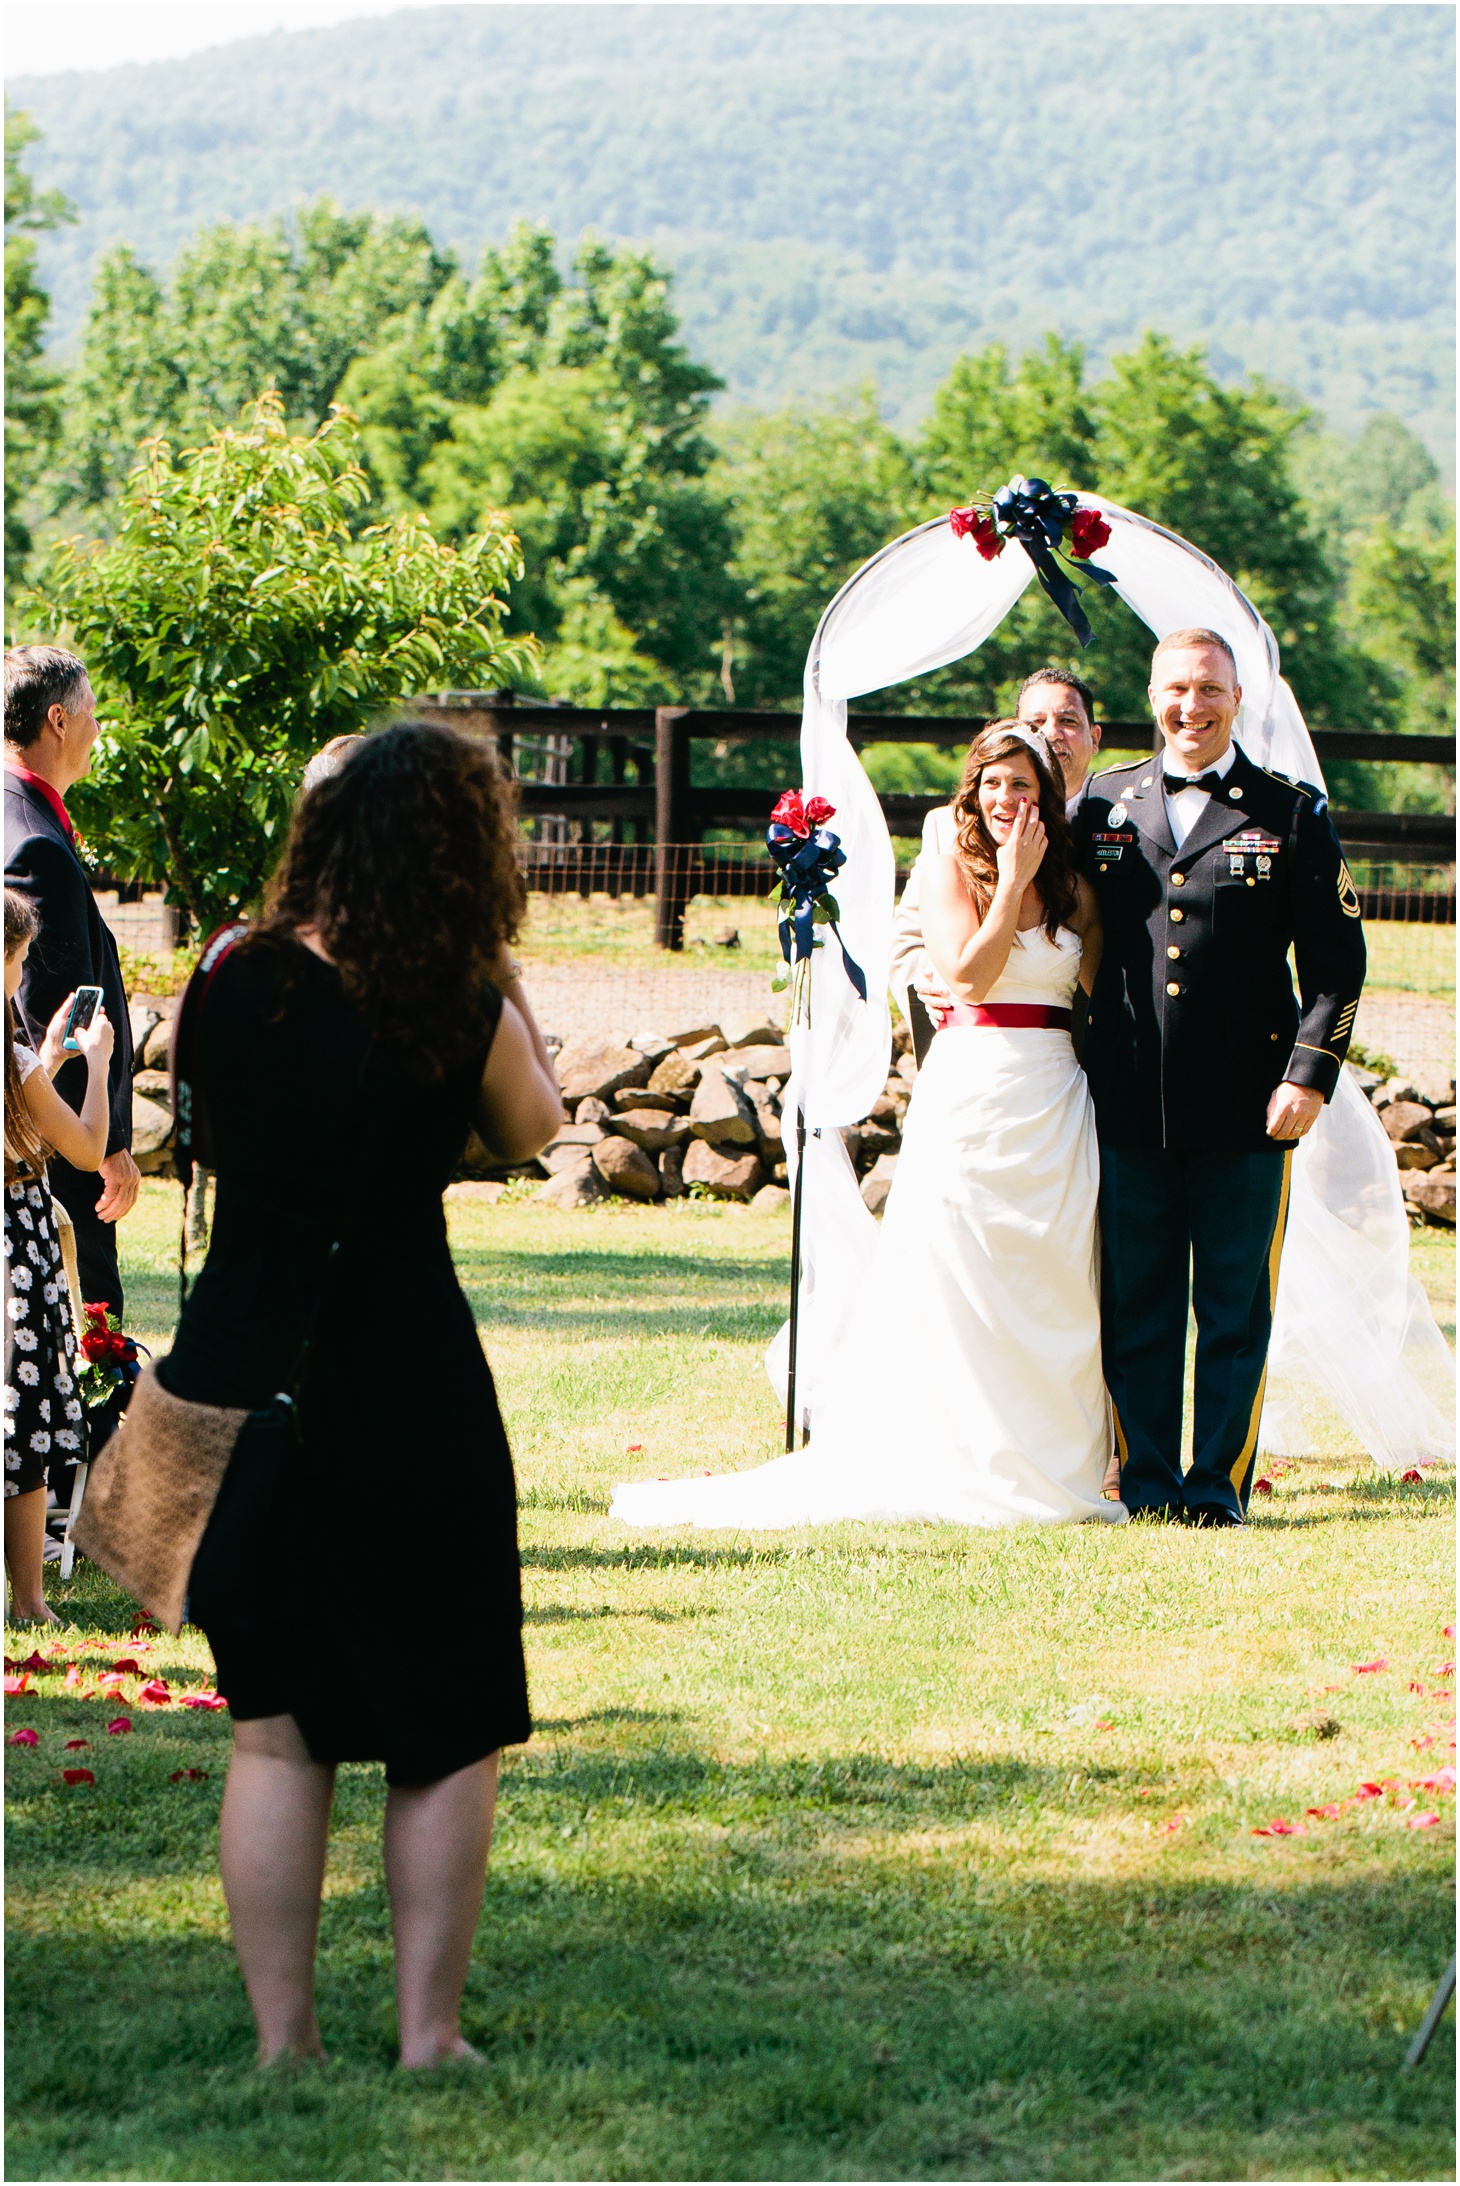 Behind the Scenes in 2014 - Weddings by Sarah Bradshaw Photography_0125